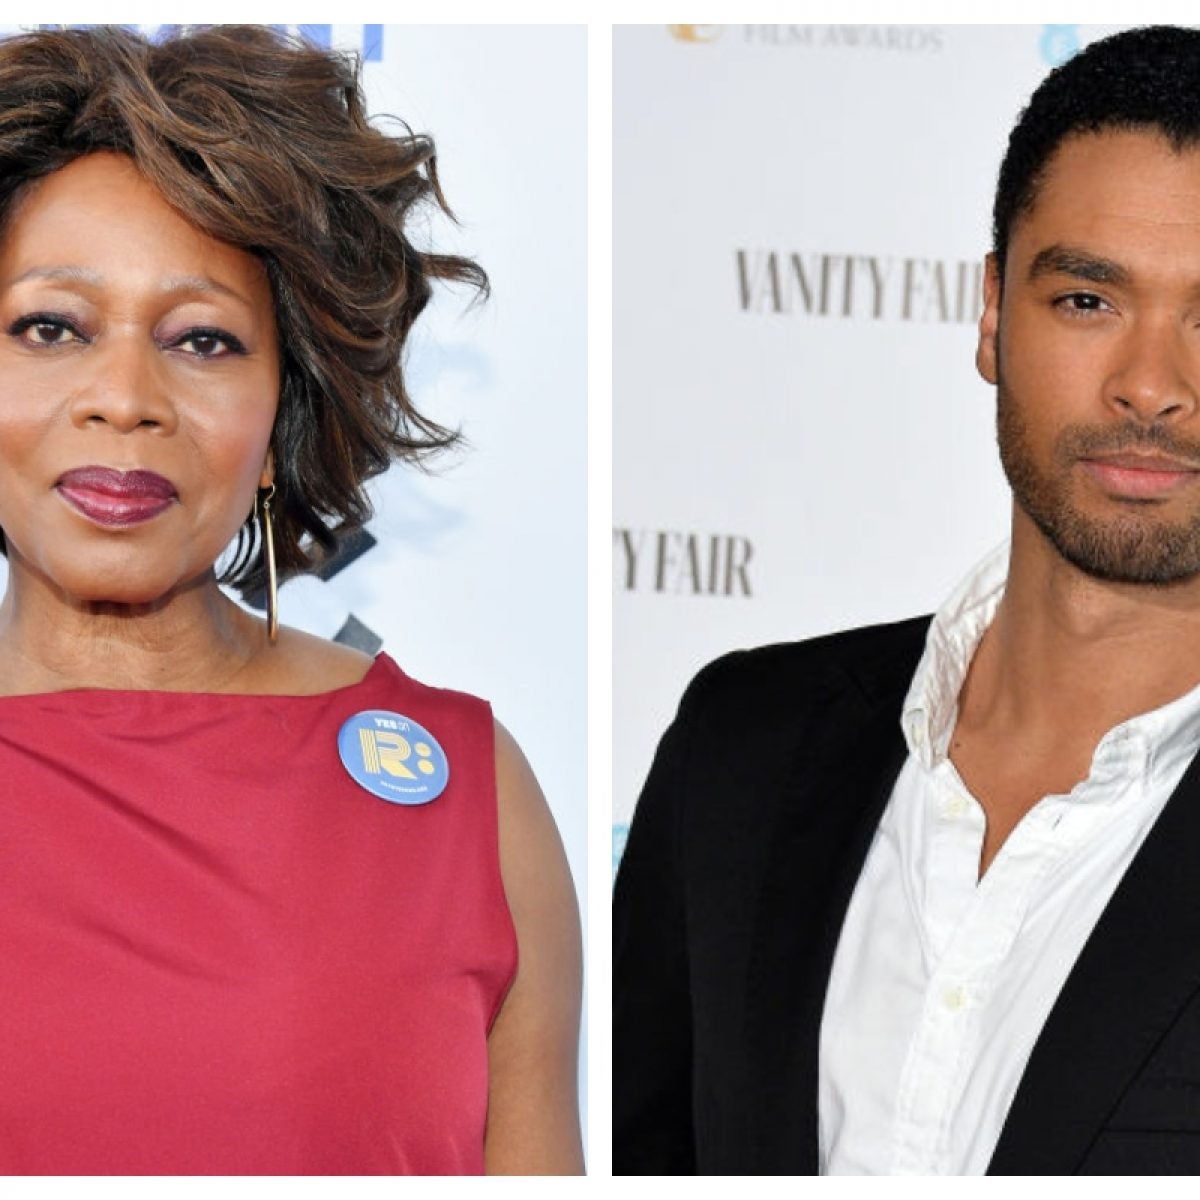 Regé-Jean Page And Alfre Woodard Cast In Netflix’s ‘The Gray Man’